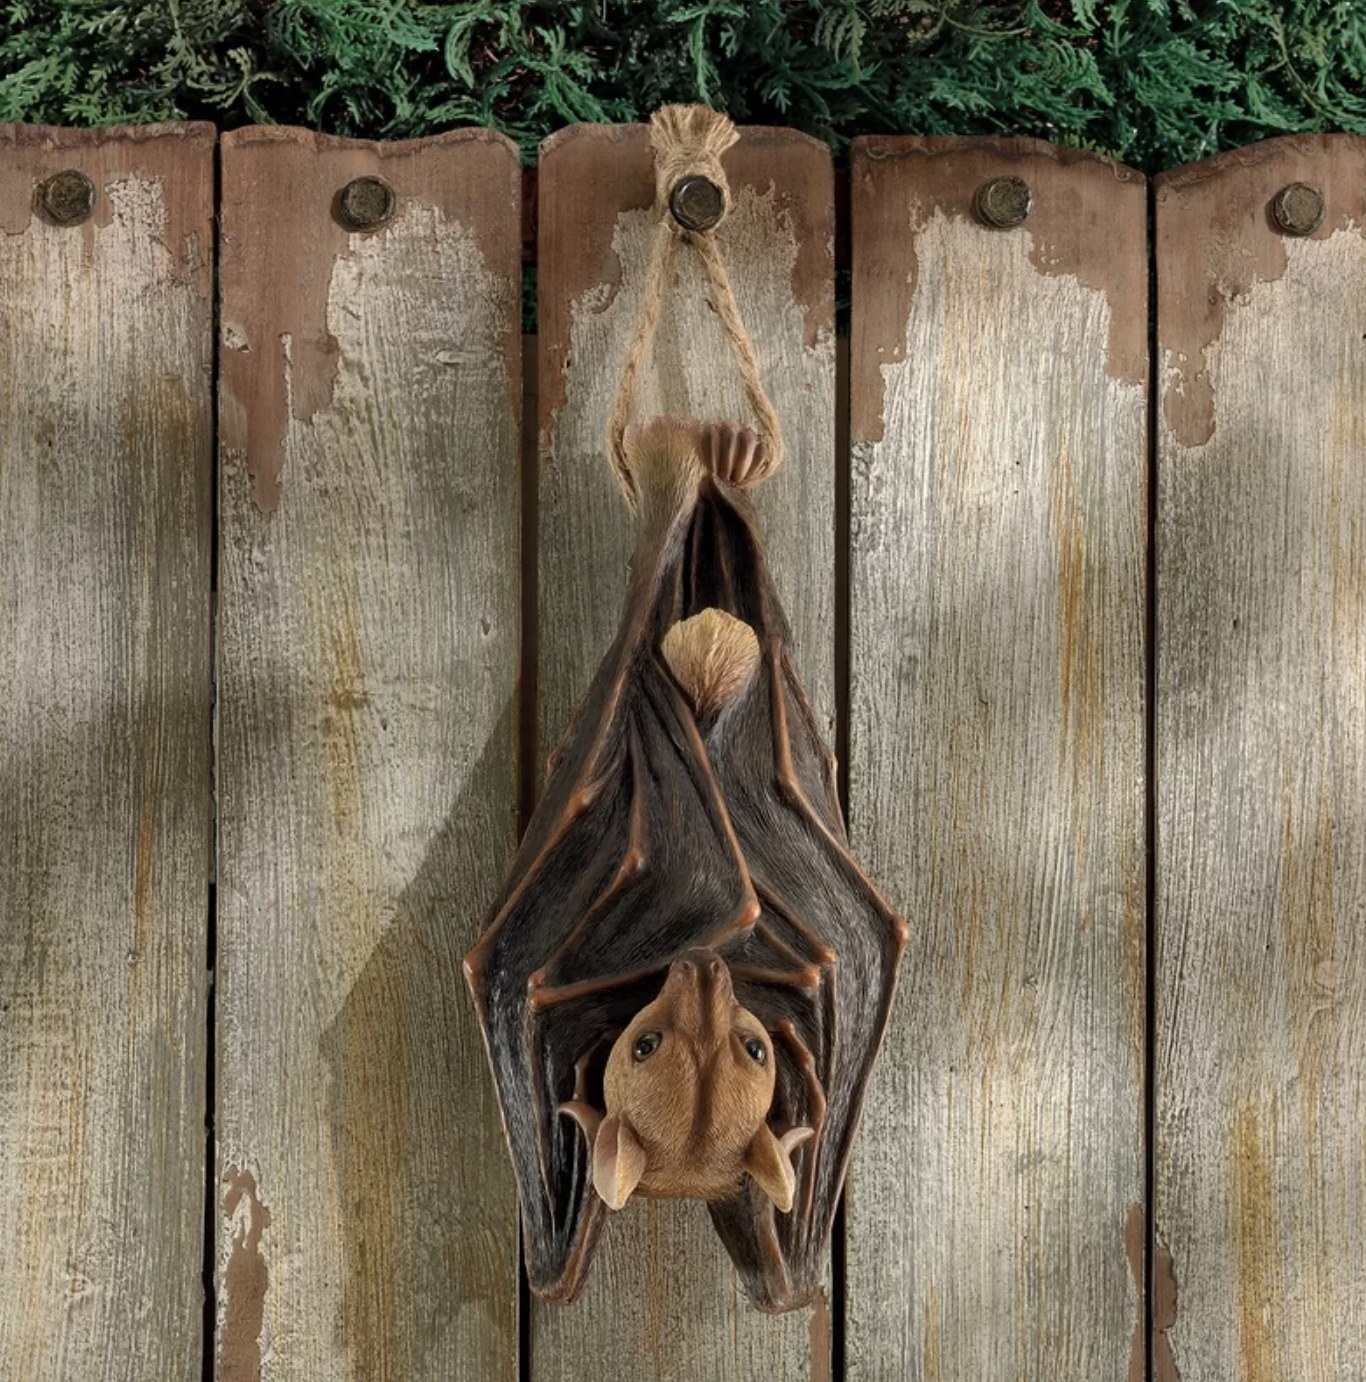 The brown and tan bat is hanging from a fence with its wings wrapped around itself and it&#x27;s face peeking out